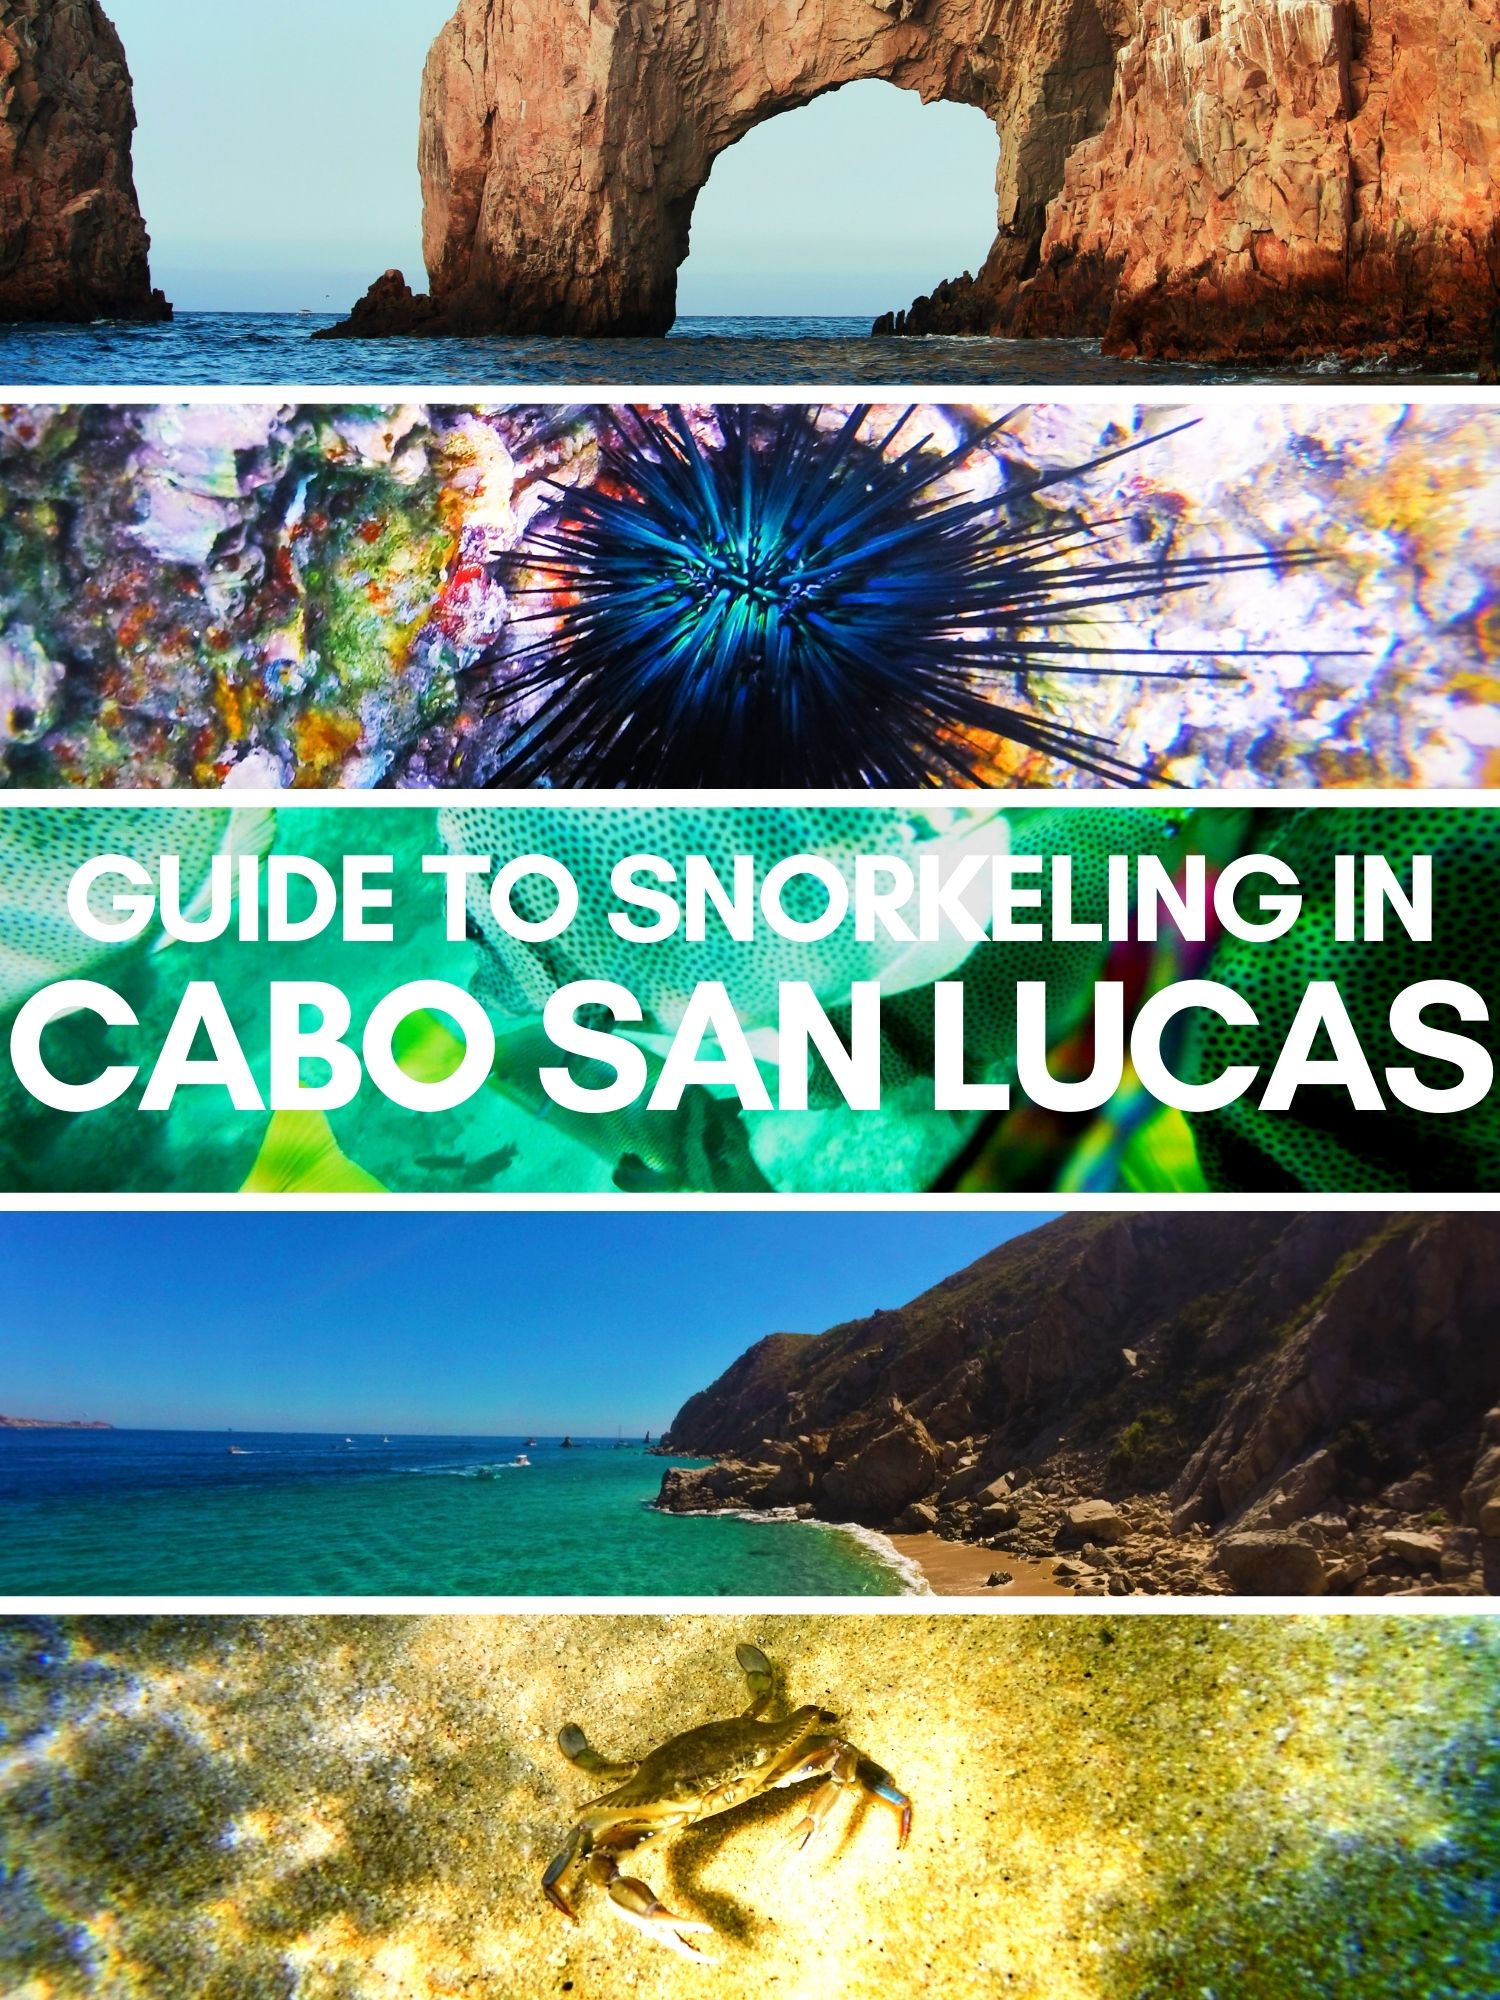 Web-Story-Cover-Snorkeling-in-Cabo-San-Lucas.jpg